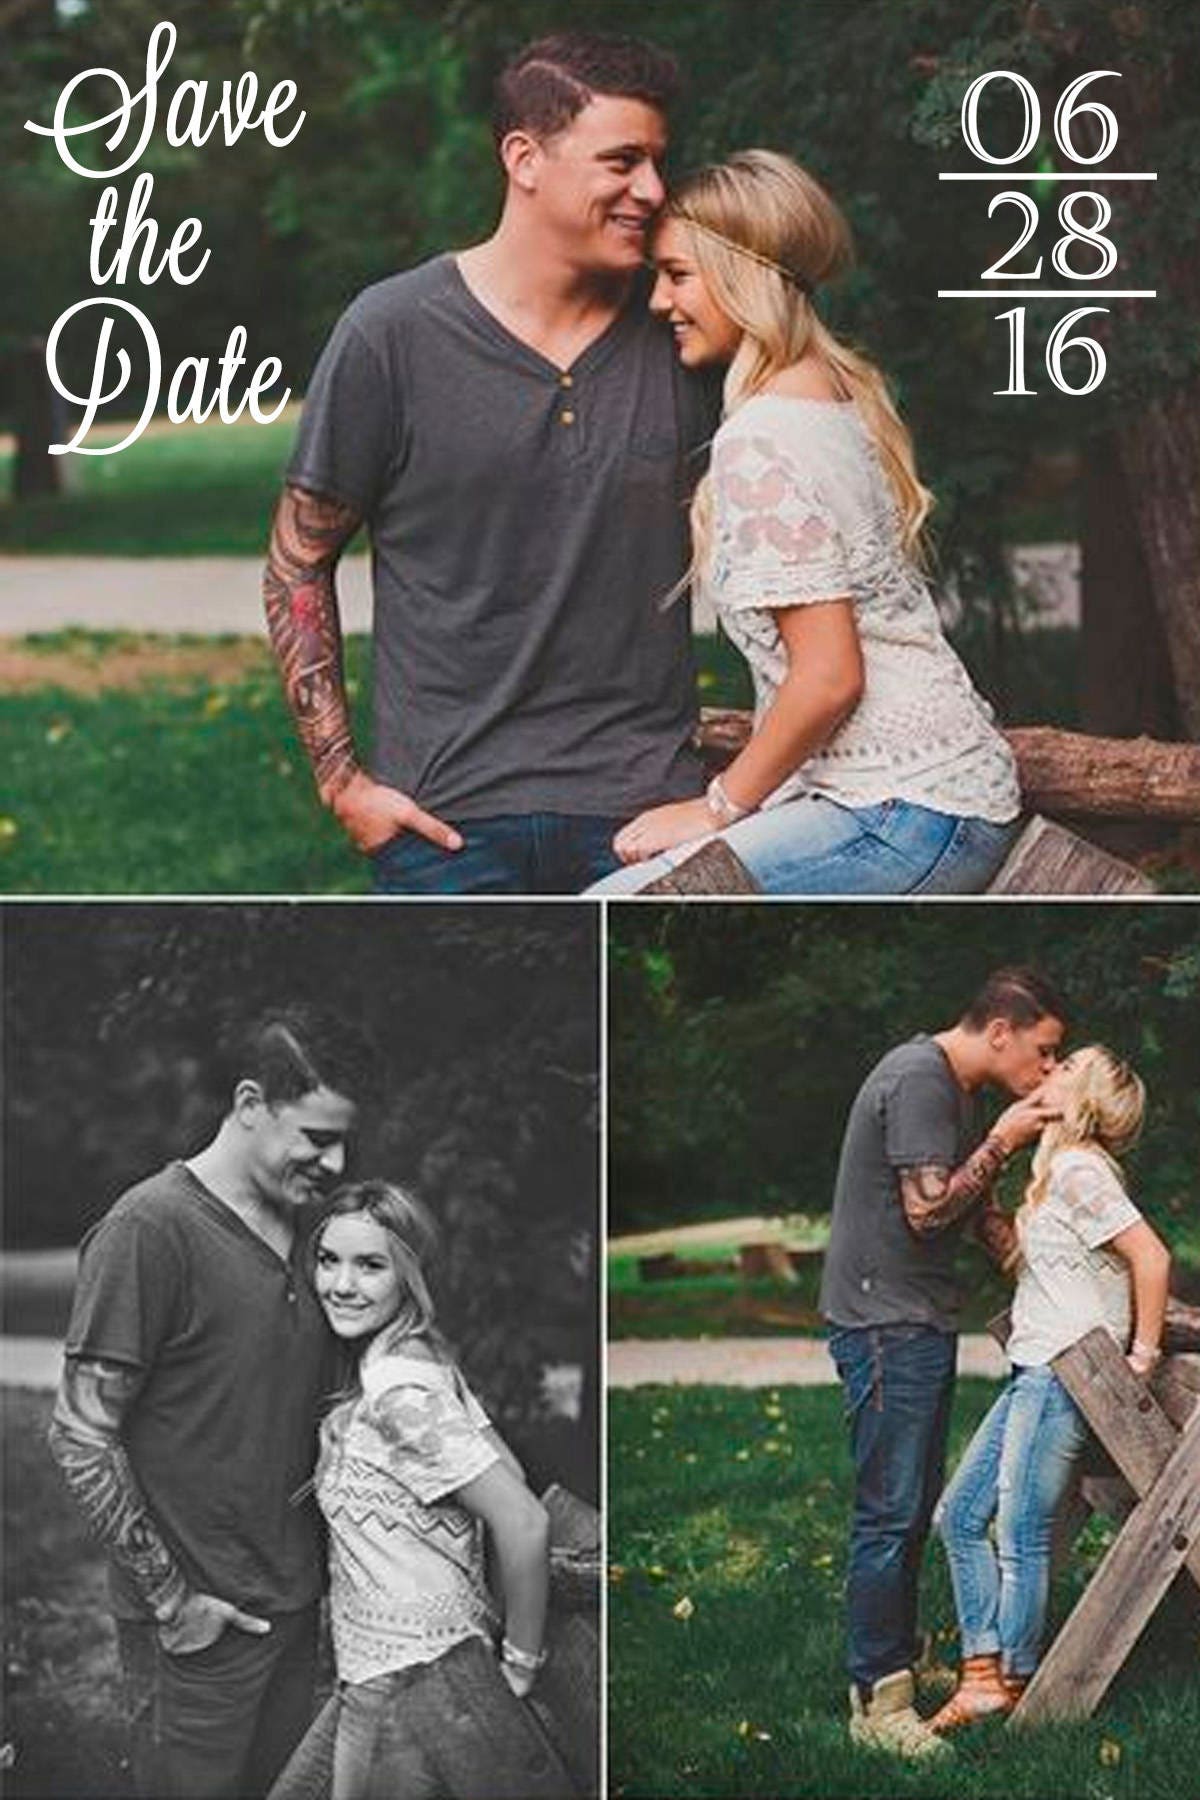 50 Save the Date Magnets, Photo Save the Date Magnets, Wedding Save the Date Magnets